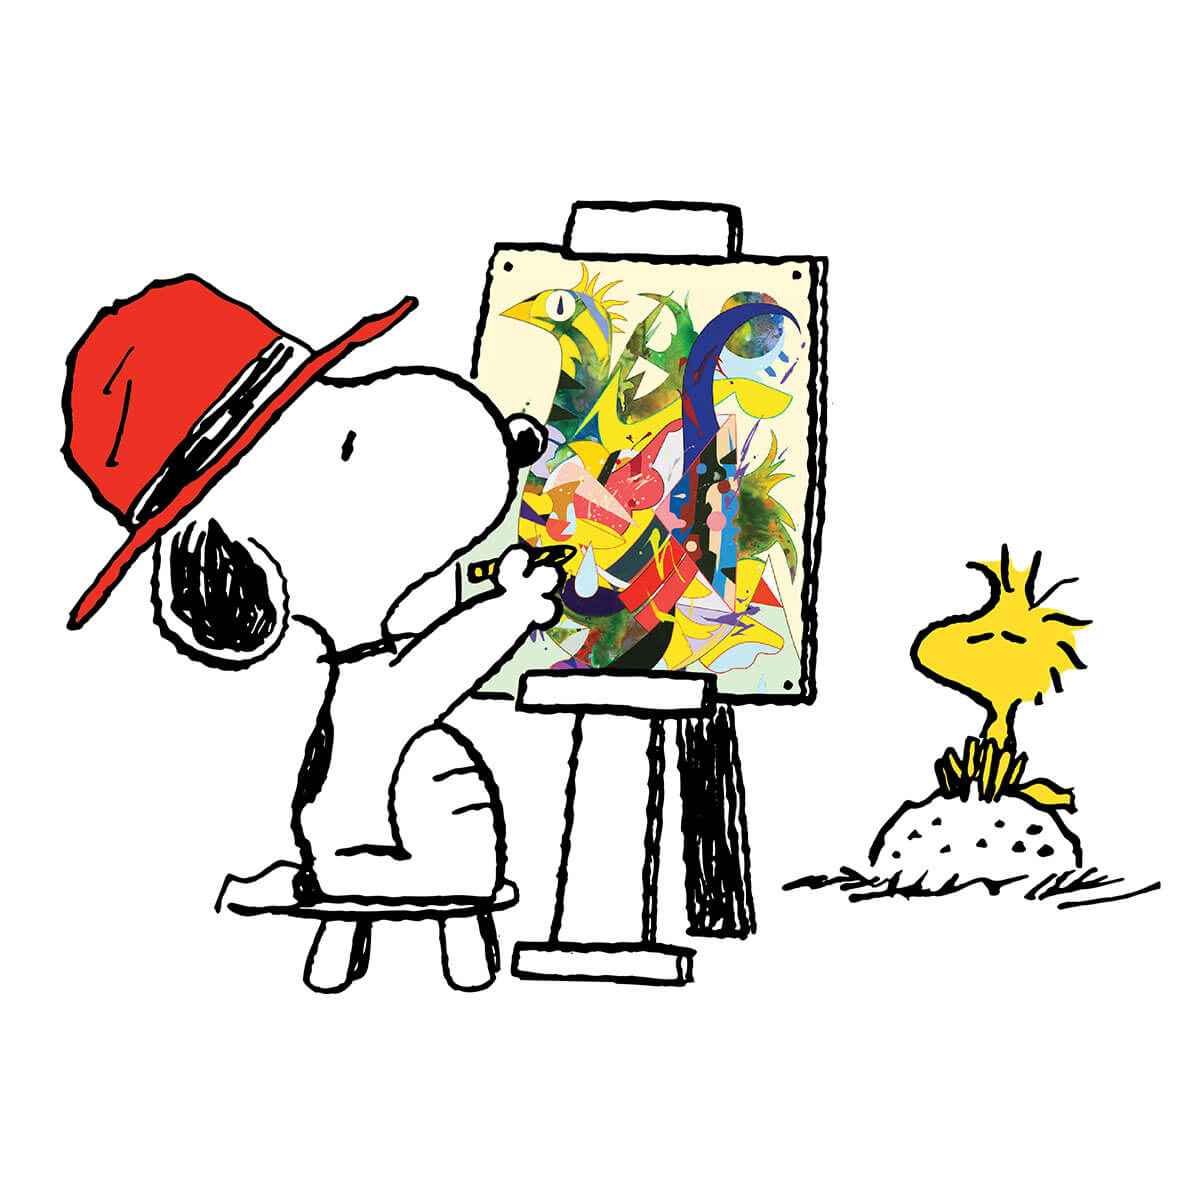 A white dog, wearing a red hair, sitting on a chair and painting a picture of a yellow bird sitting in front of him. 